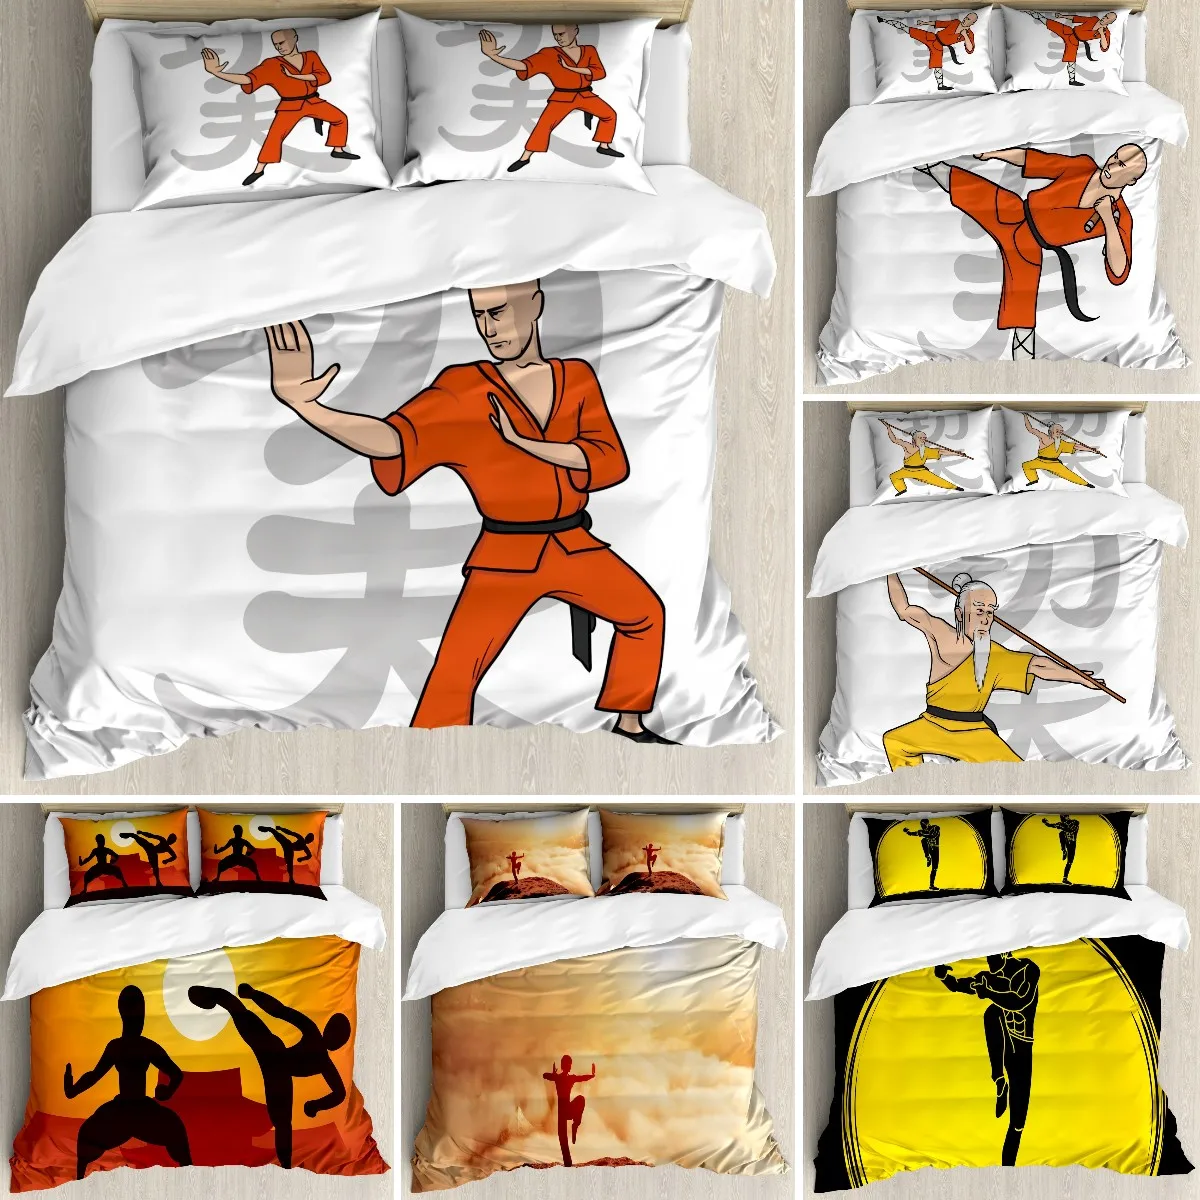 

Kung Fu Duvet Cover Set Queen Size,Eastern Martial Art Sports Themed Cartoon Warrior In Traditional Clothes on Sign Quilt Cover